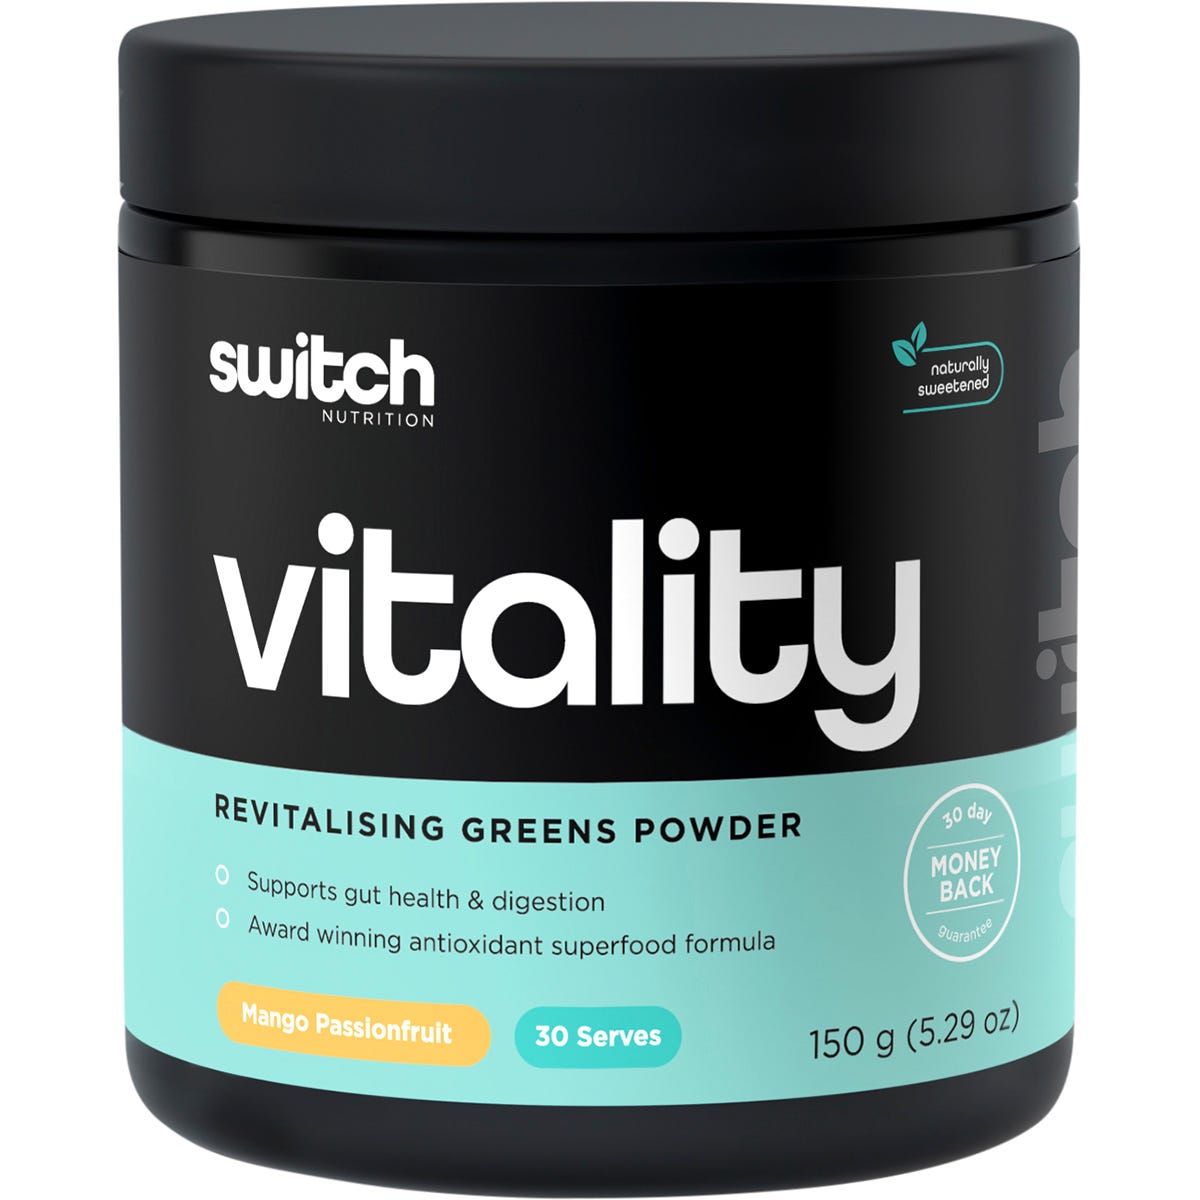 Switch Nutrition Vitality Revitalising Greens Powder Mango Passionfruit 150g - Dr Earth - Greens